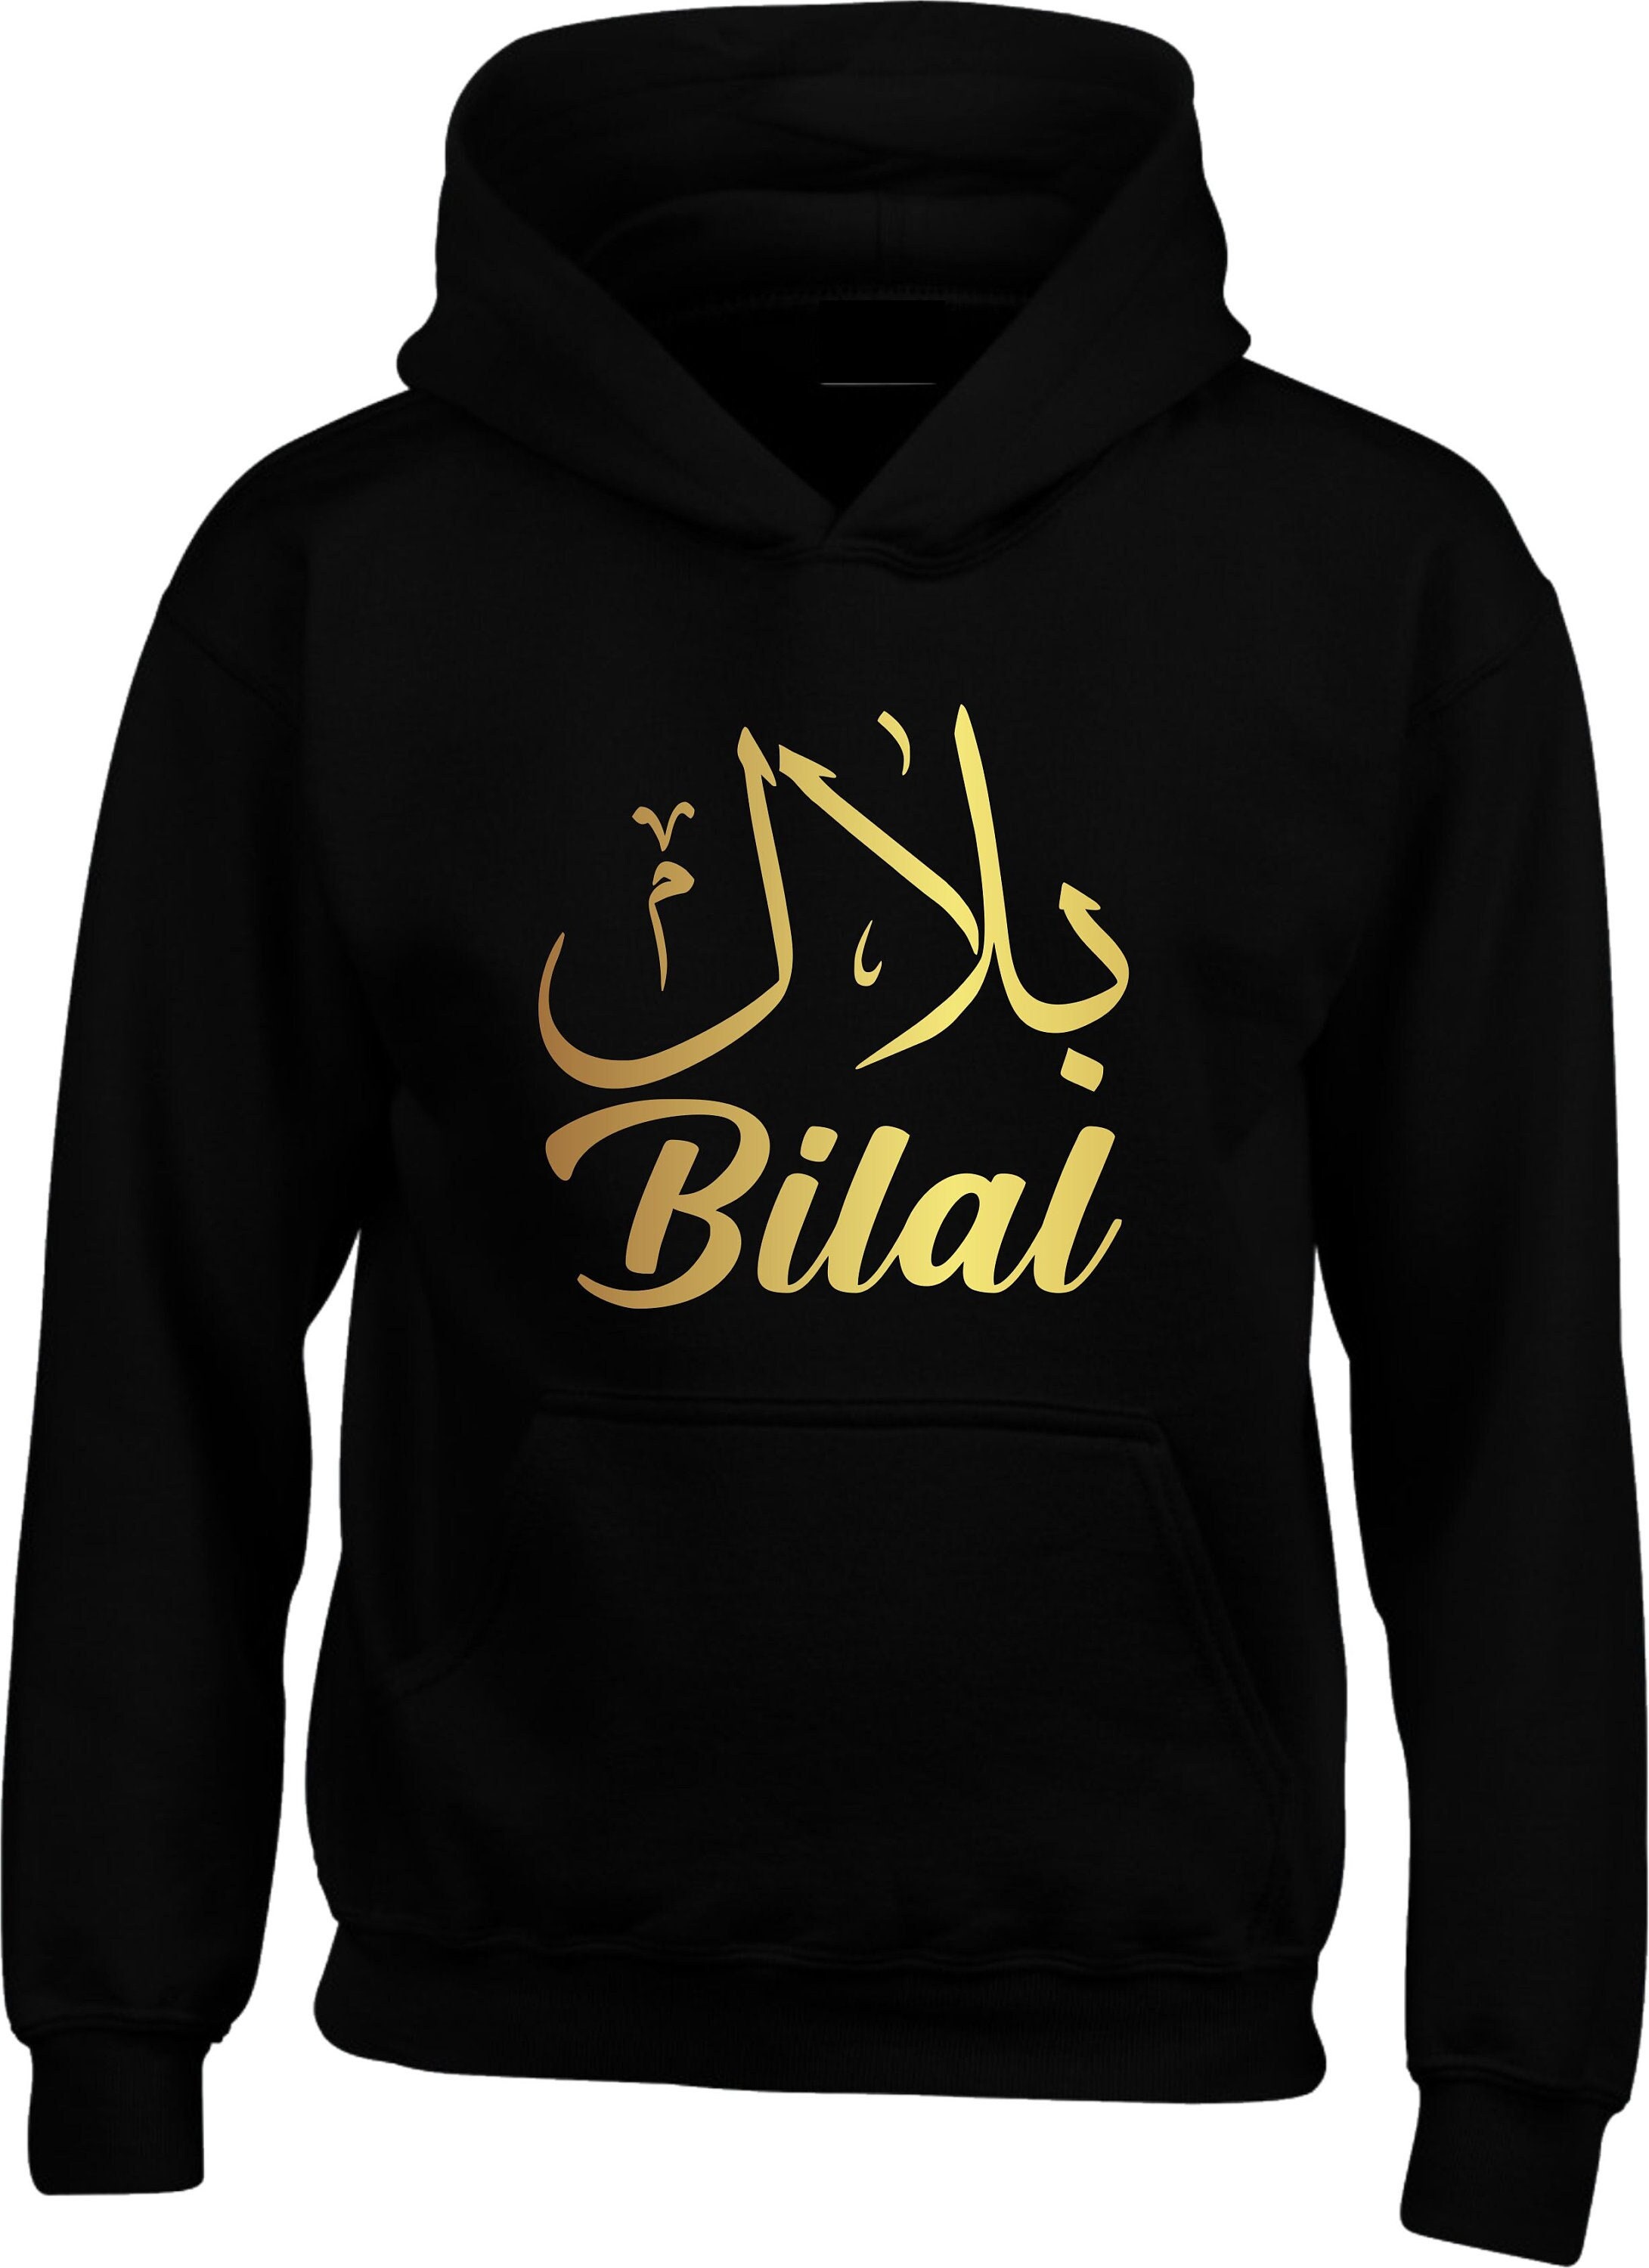 Personalised Hoodie Arabic English Calligraphy Name Gold Print Islamic Religious Gift Family Adults Kids Women Hoody Unisex Jumper